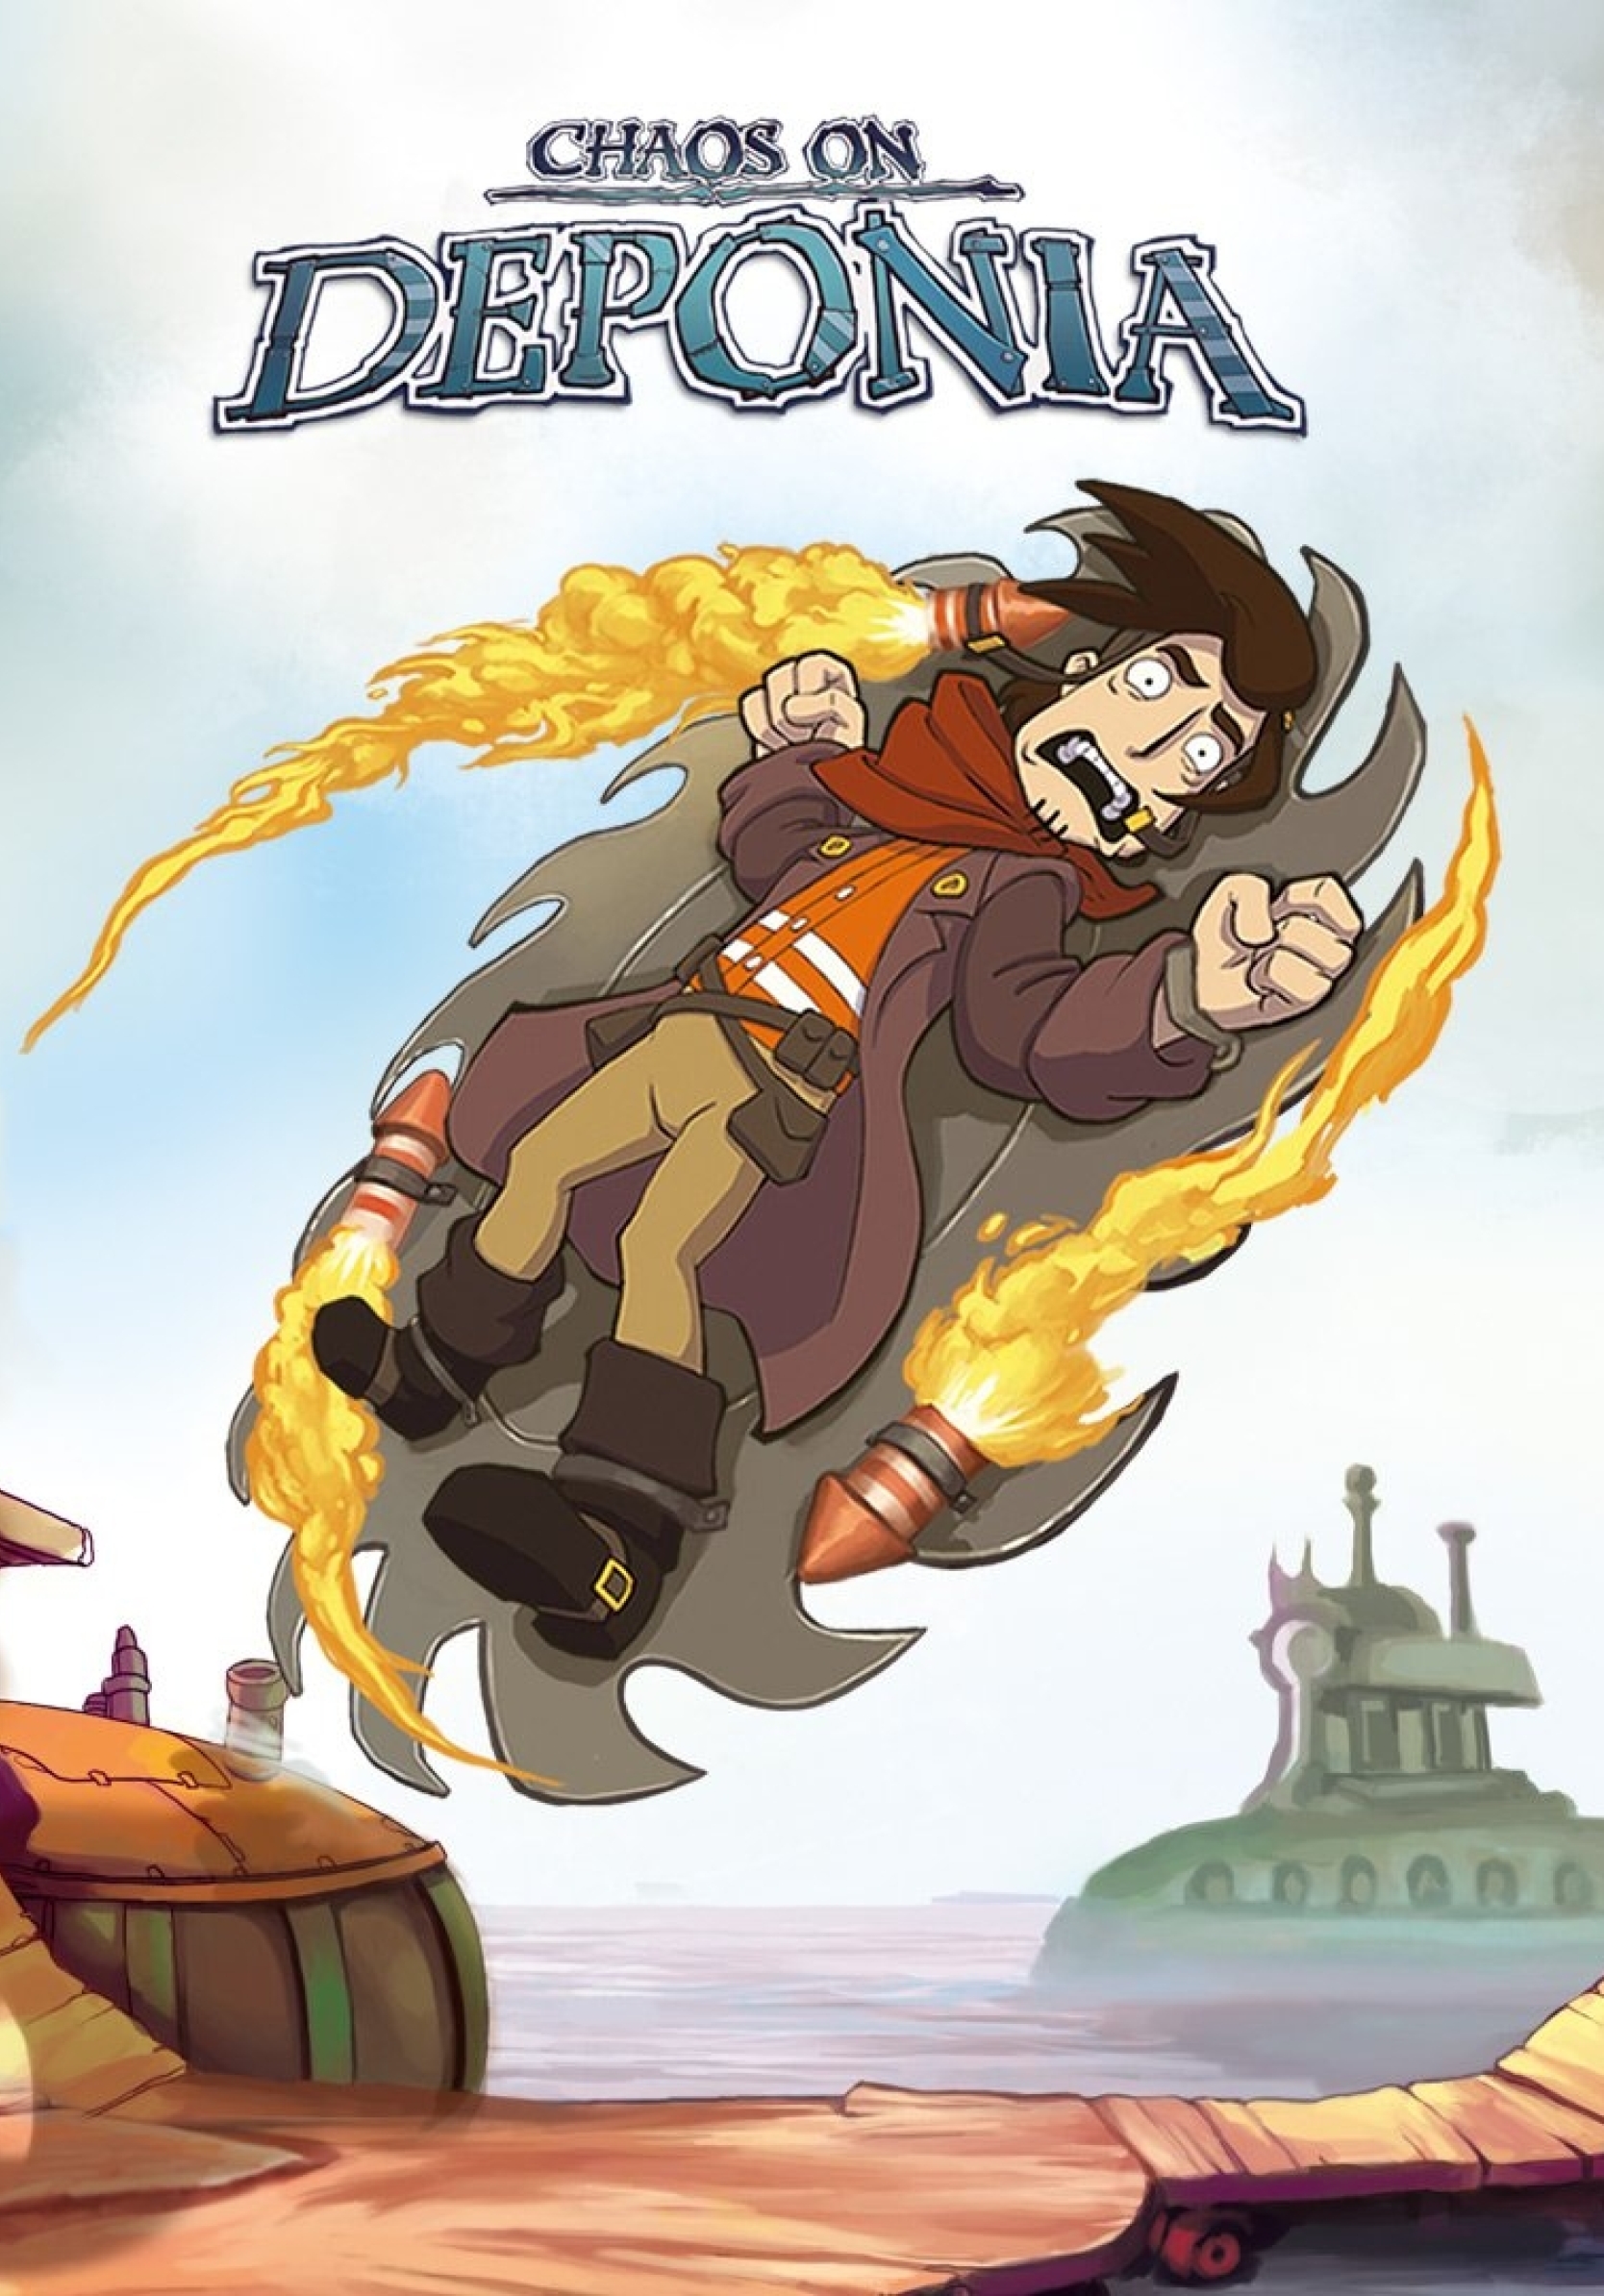 Chaos of deponia steam фото 85